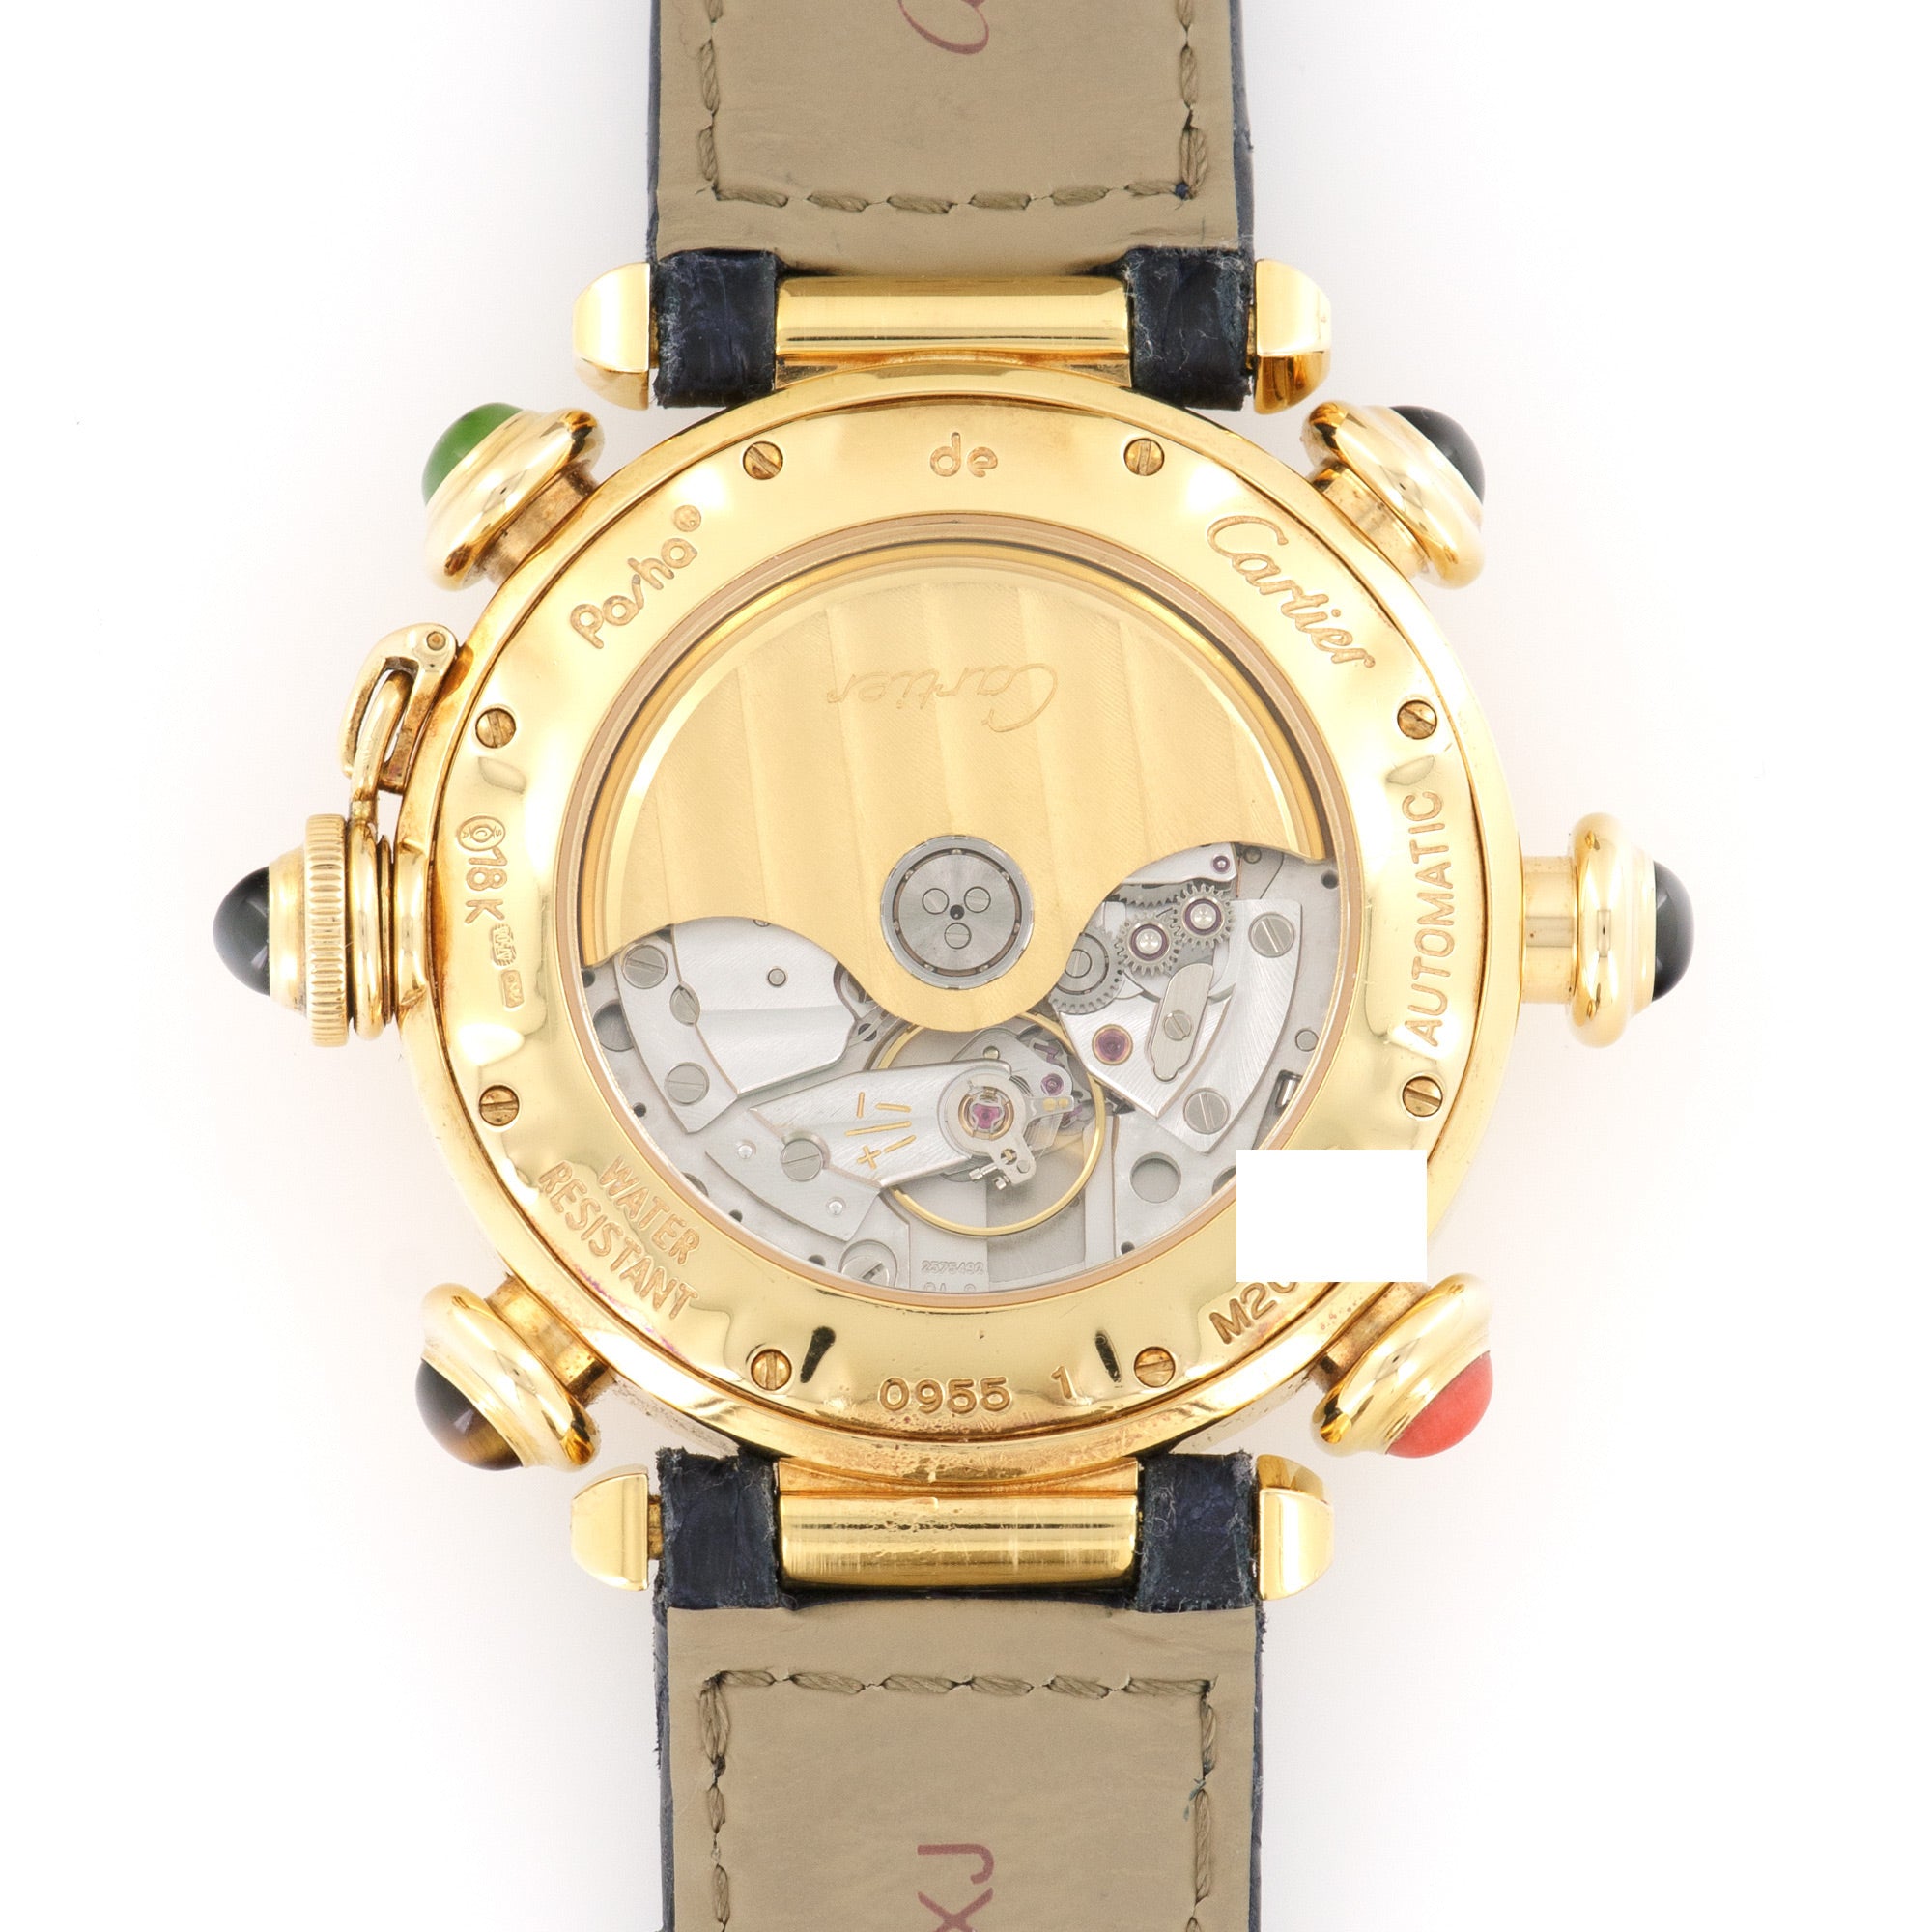 Cartier - Cartier Yellow Gold Pasha Golf Automatic Watch - The Keystone Watches